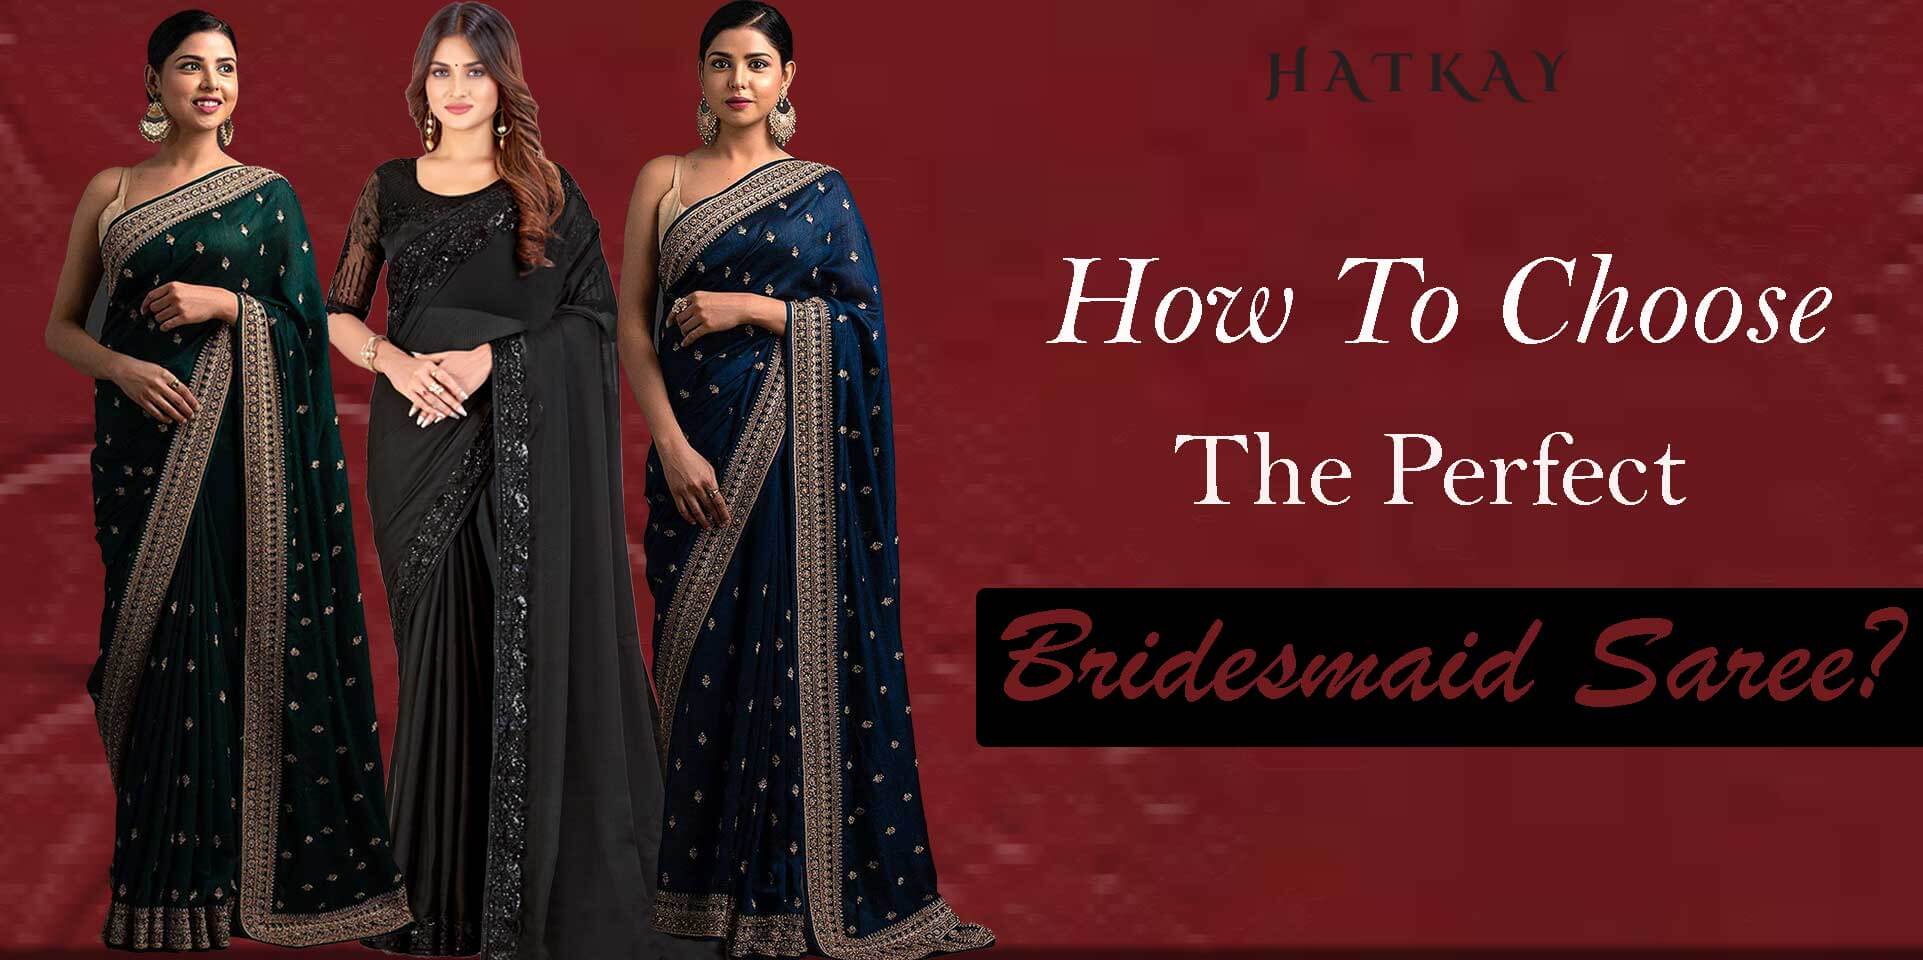 How to Choose the Perfect Bridesmaid Saree? How to Wear a Modern Saree as a Bridesmaid?